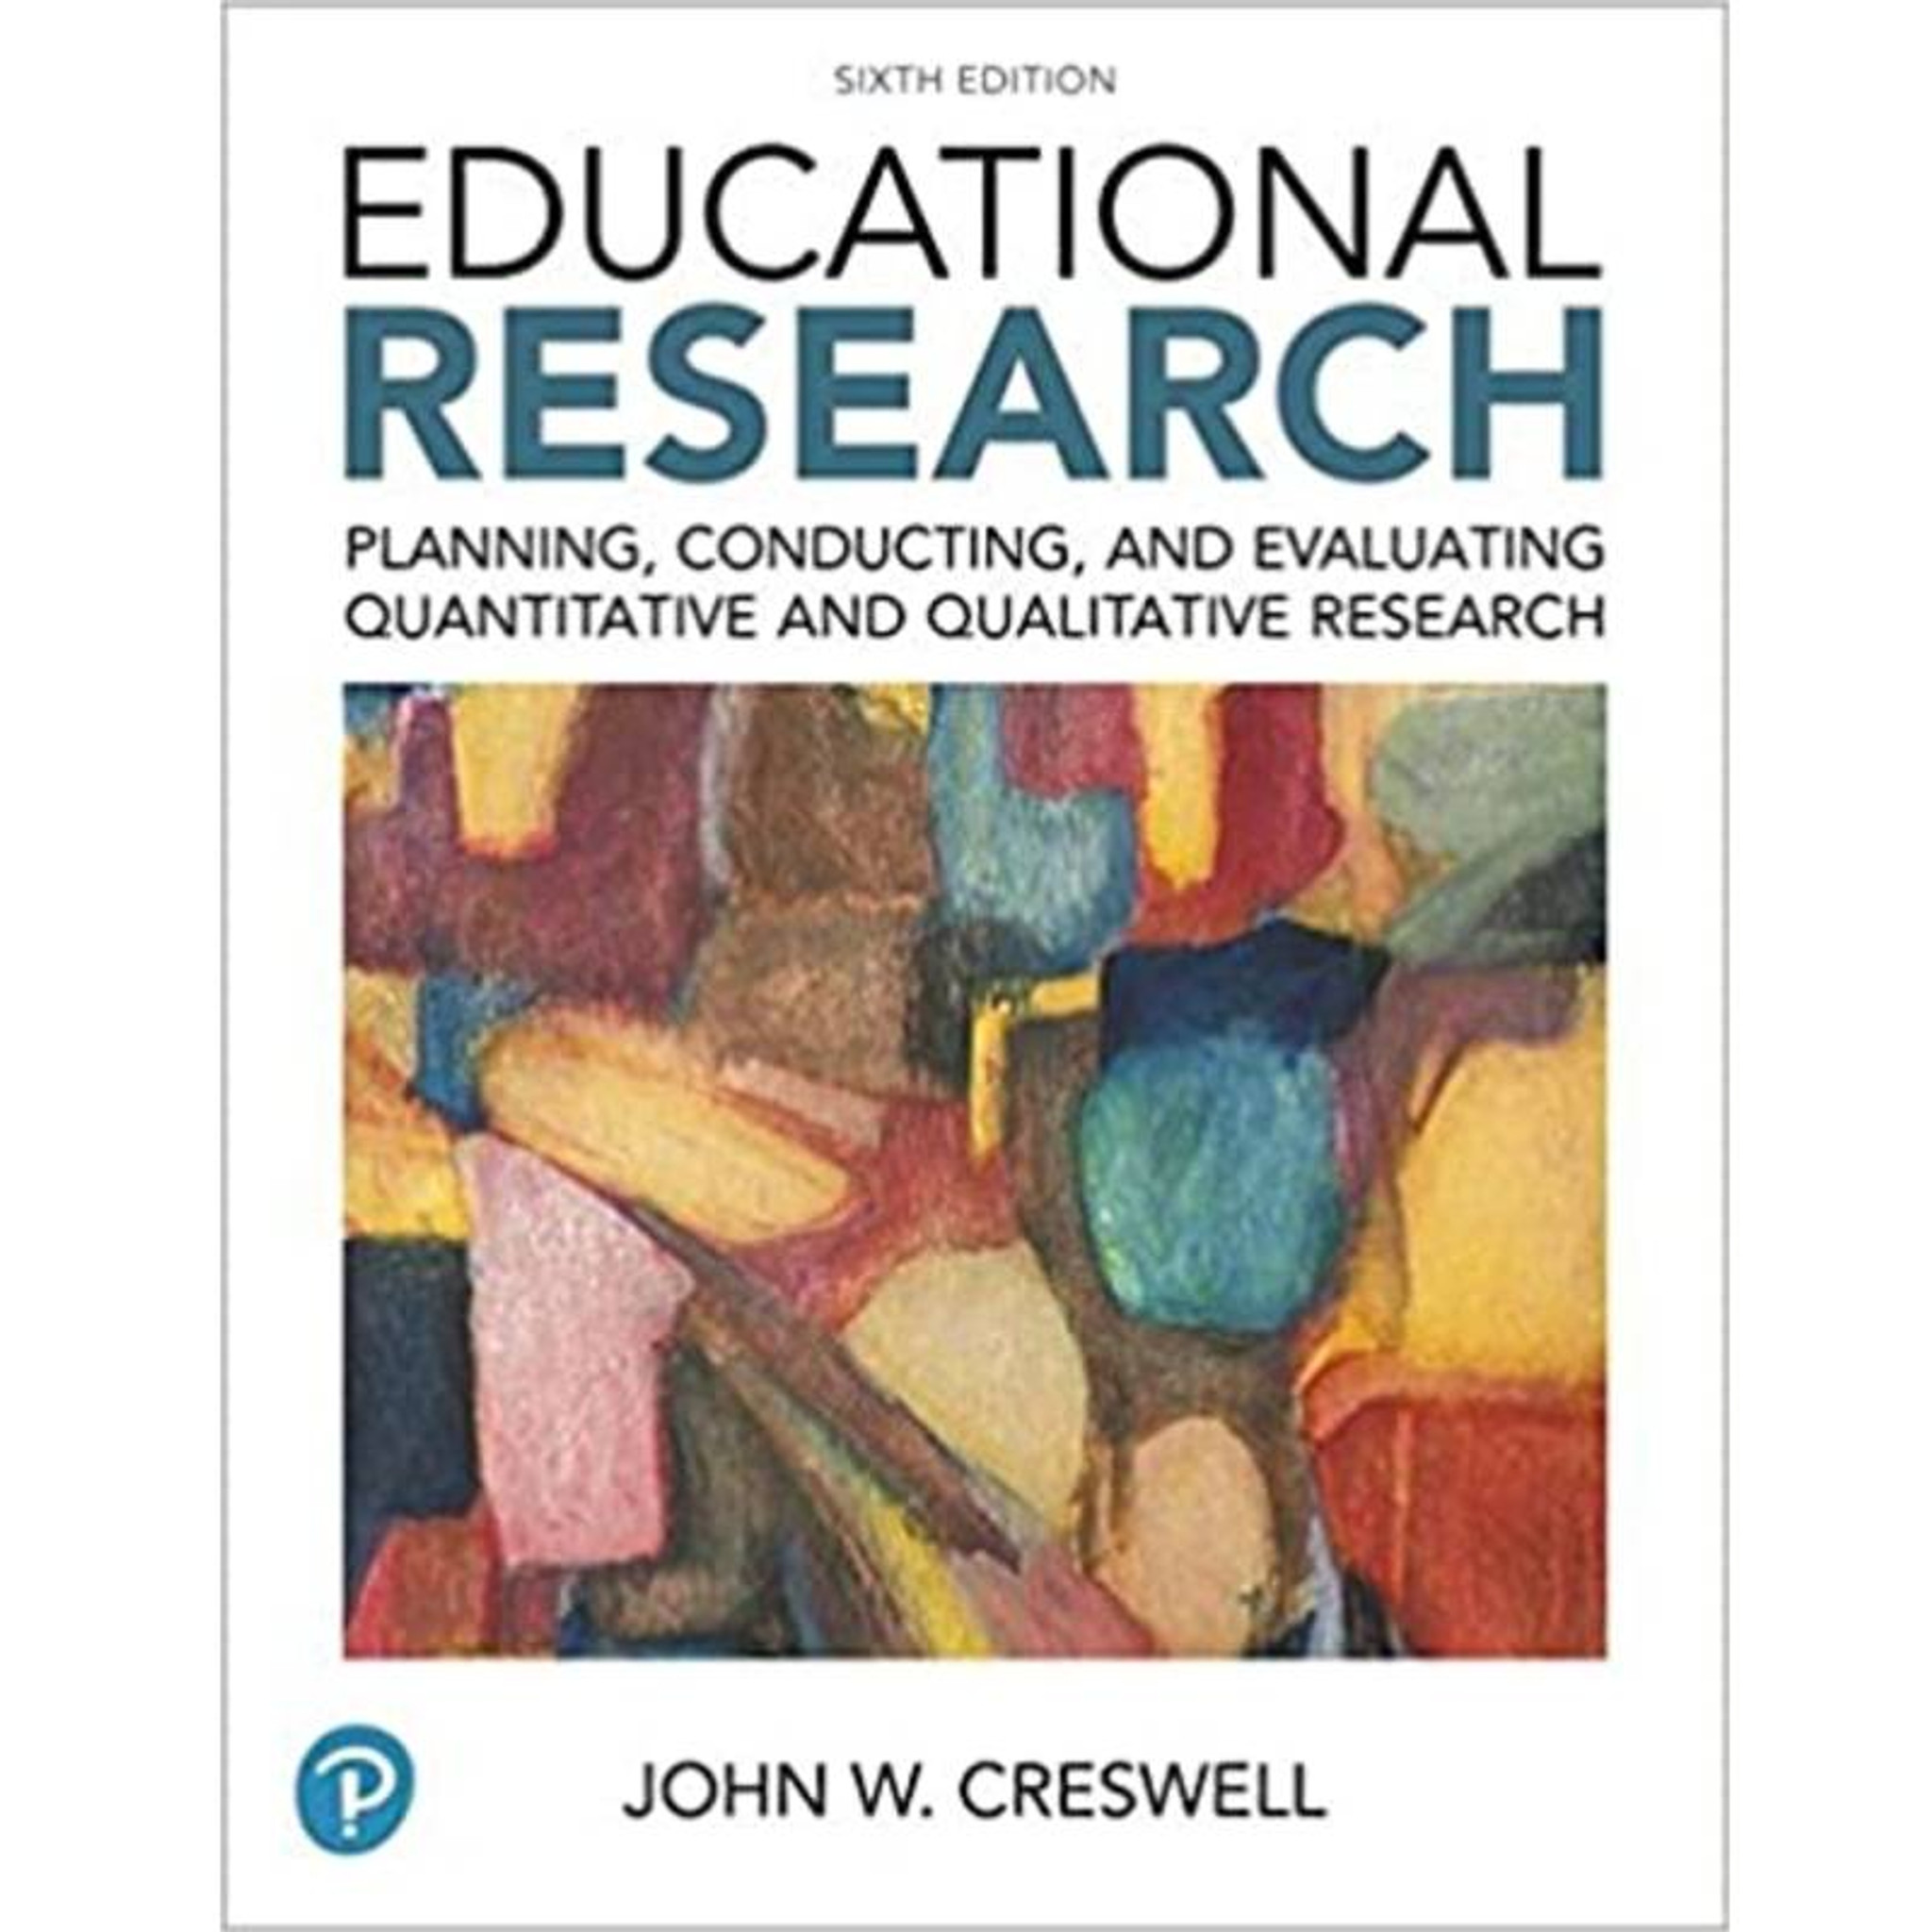 what is descriptive quantitative research according to creswell